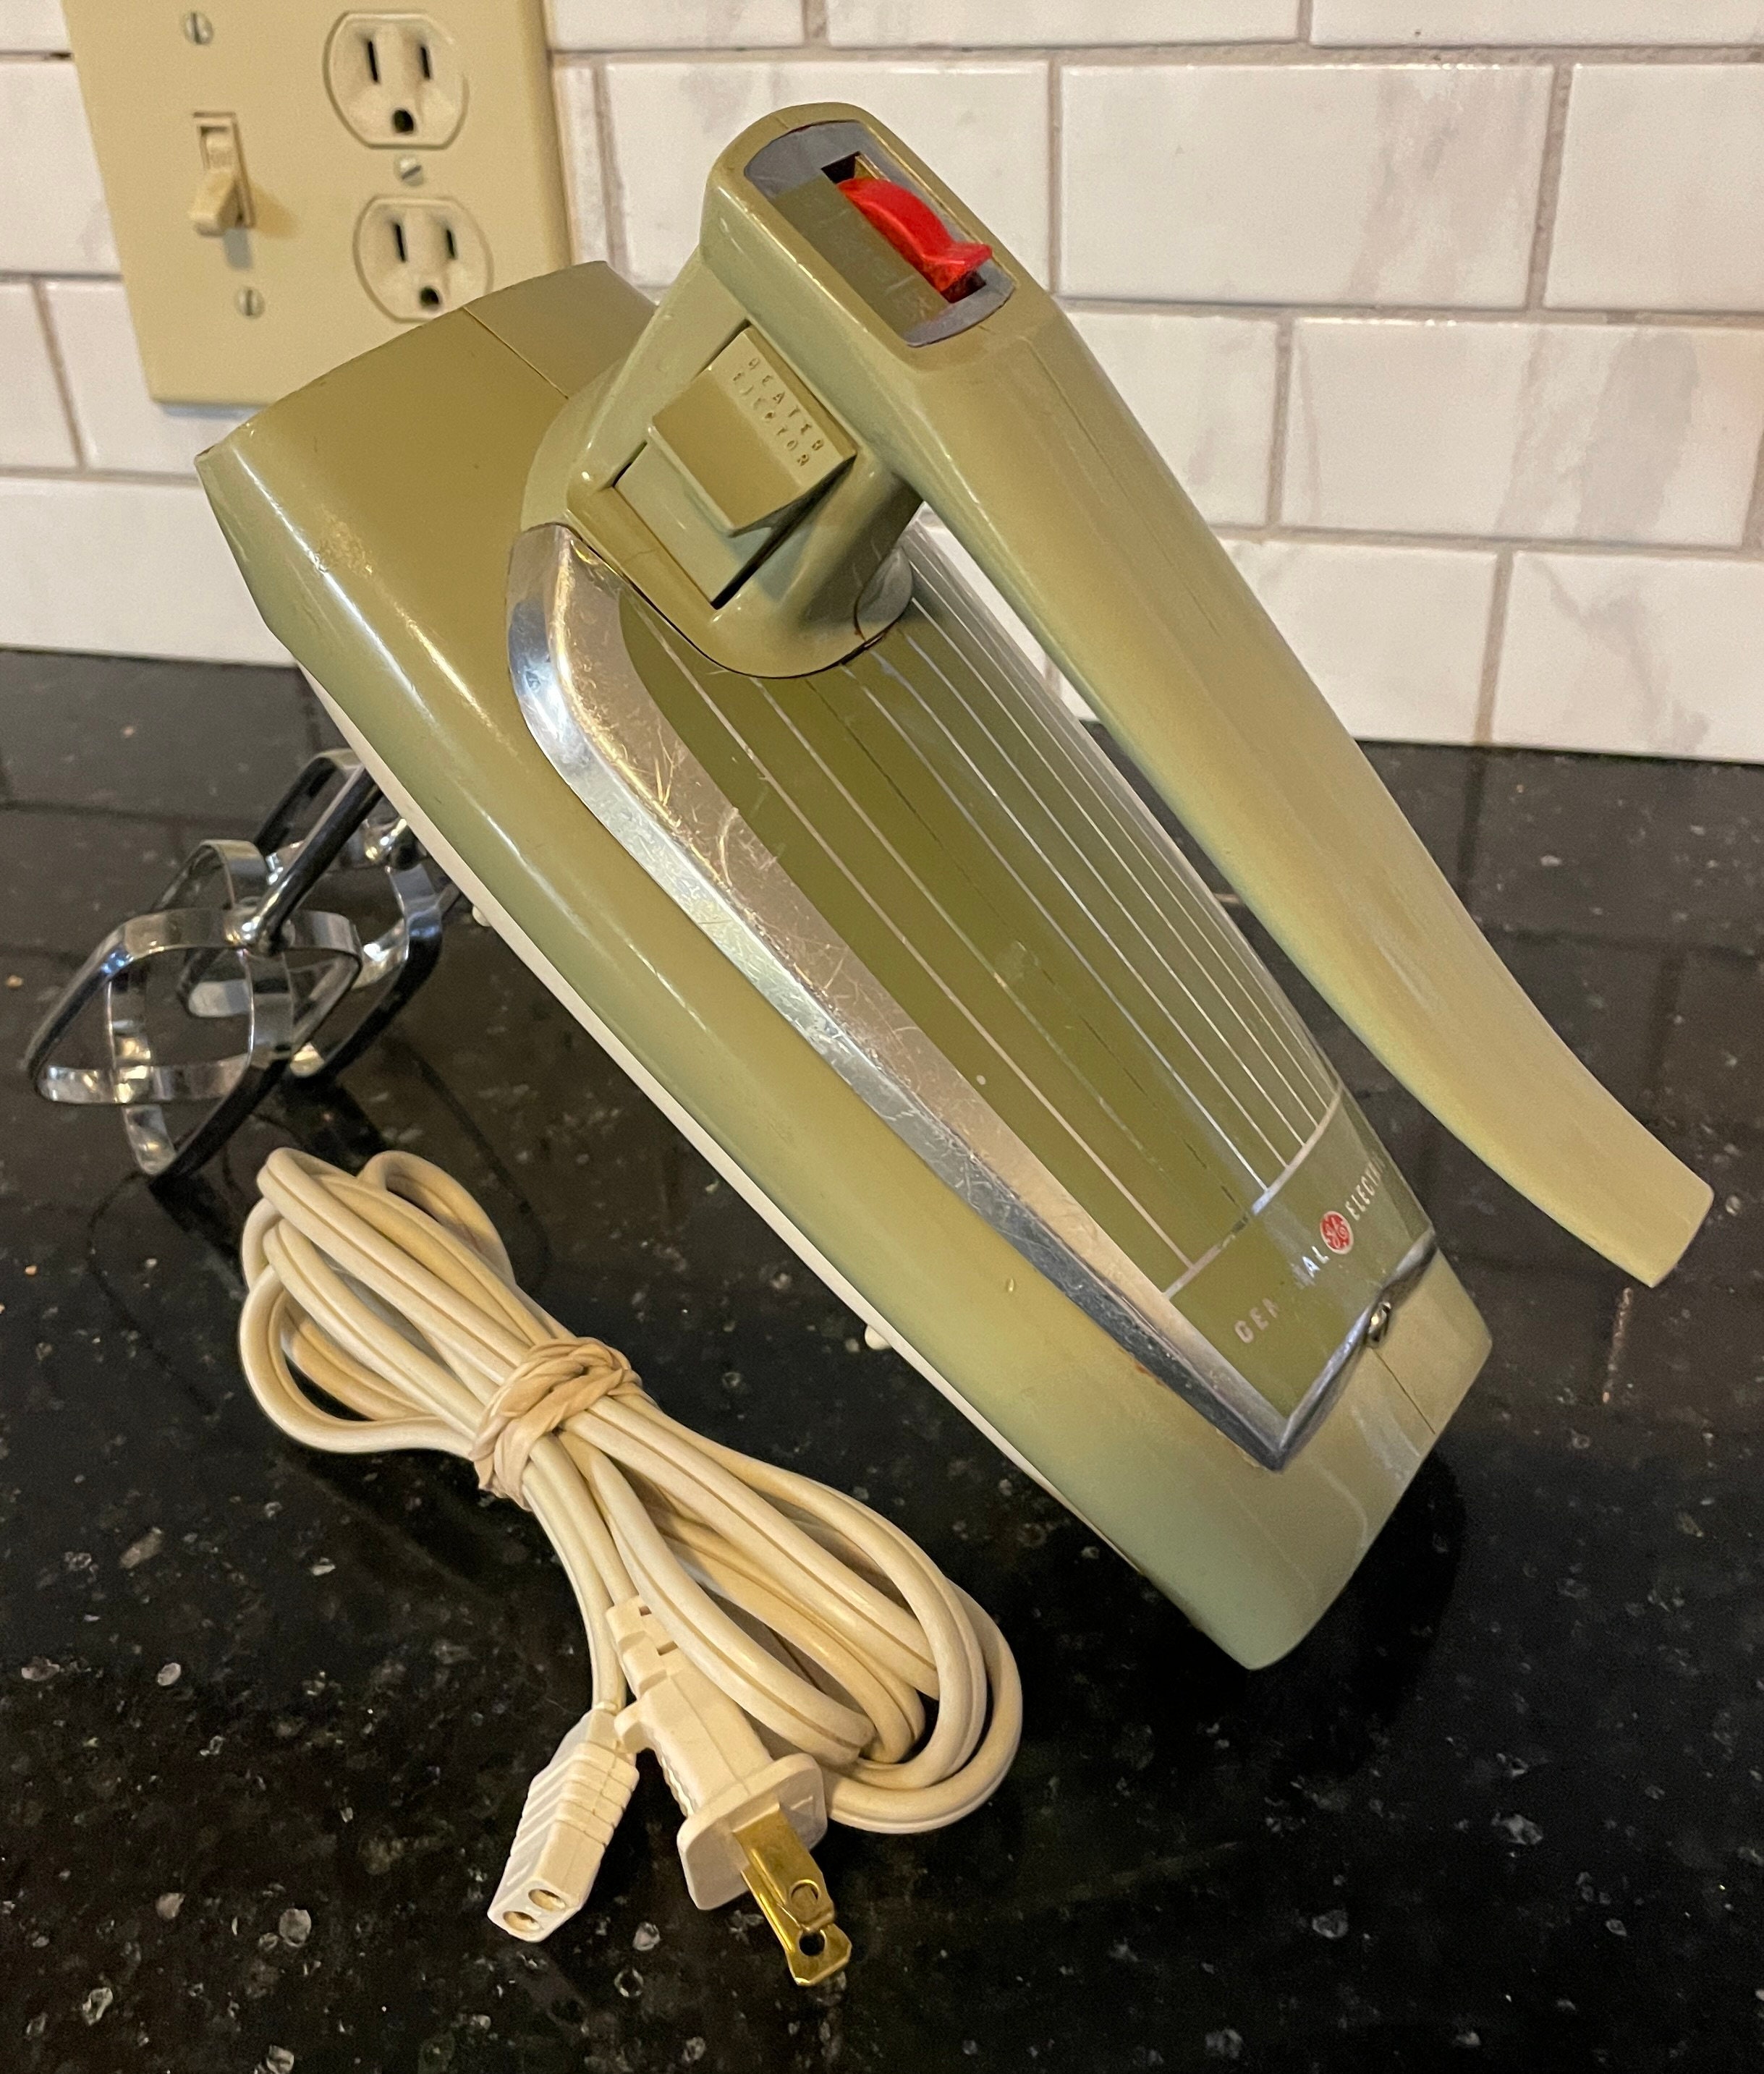 Vintage GE General Electric Avocado Green Stand/hand Mixer D1M46